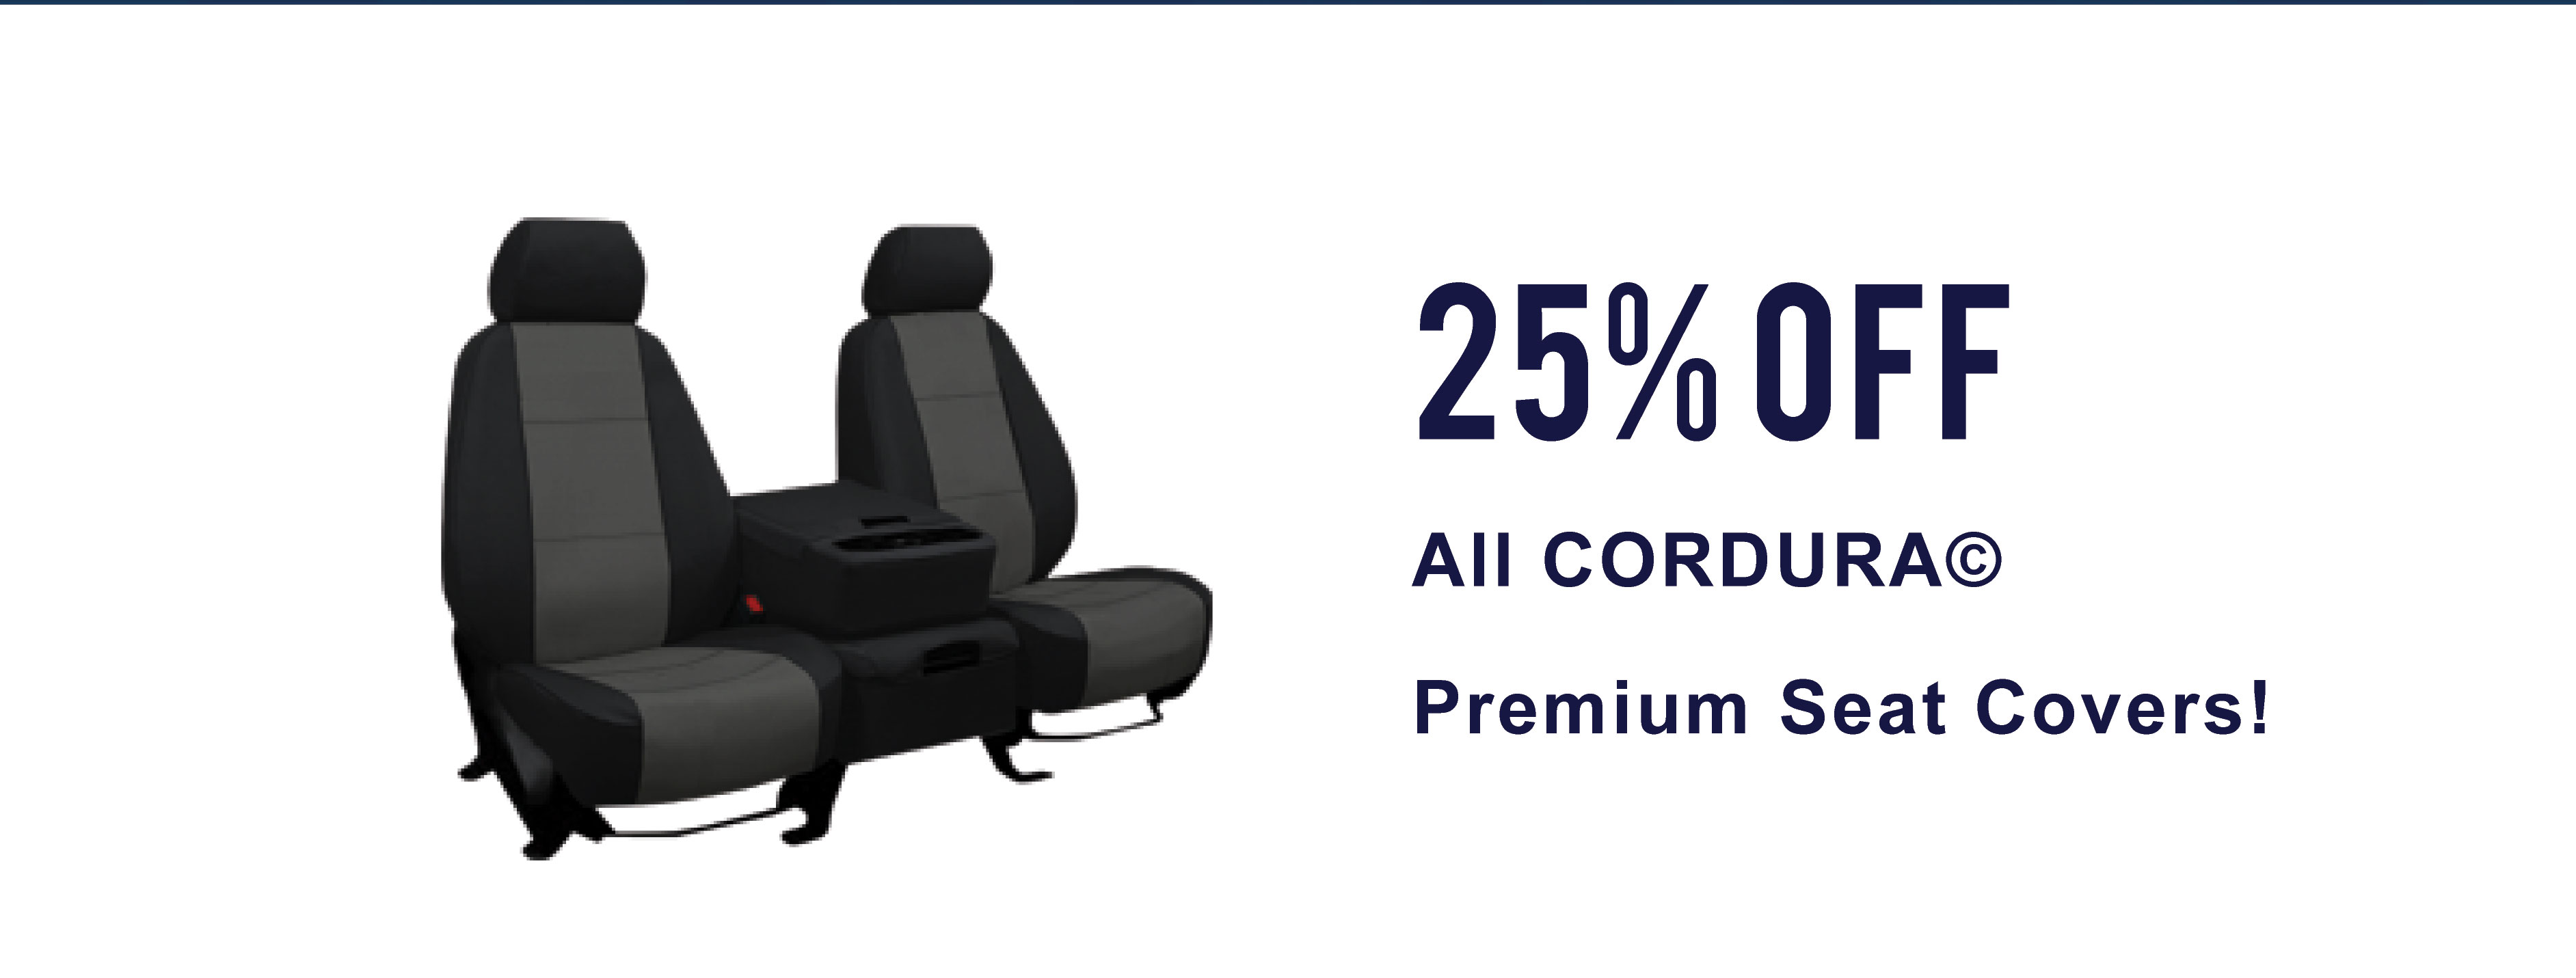 25% Off All Cordura Seat Covers!